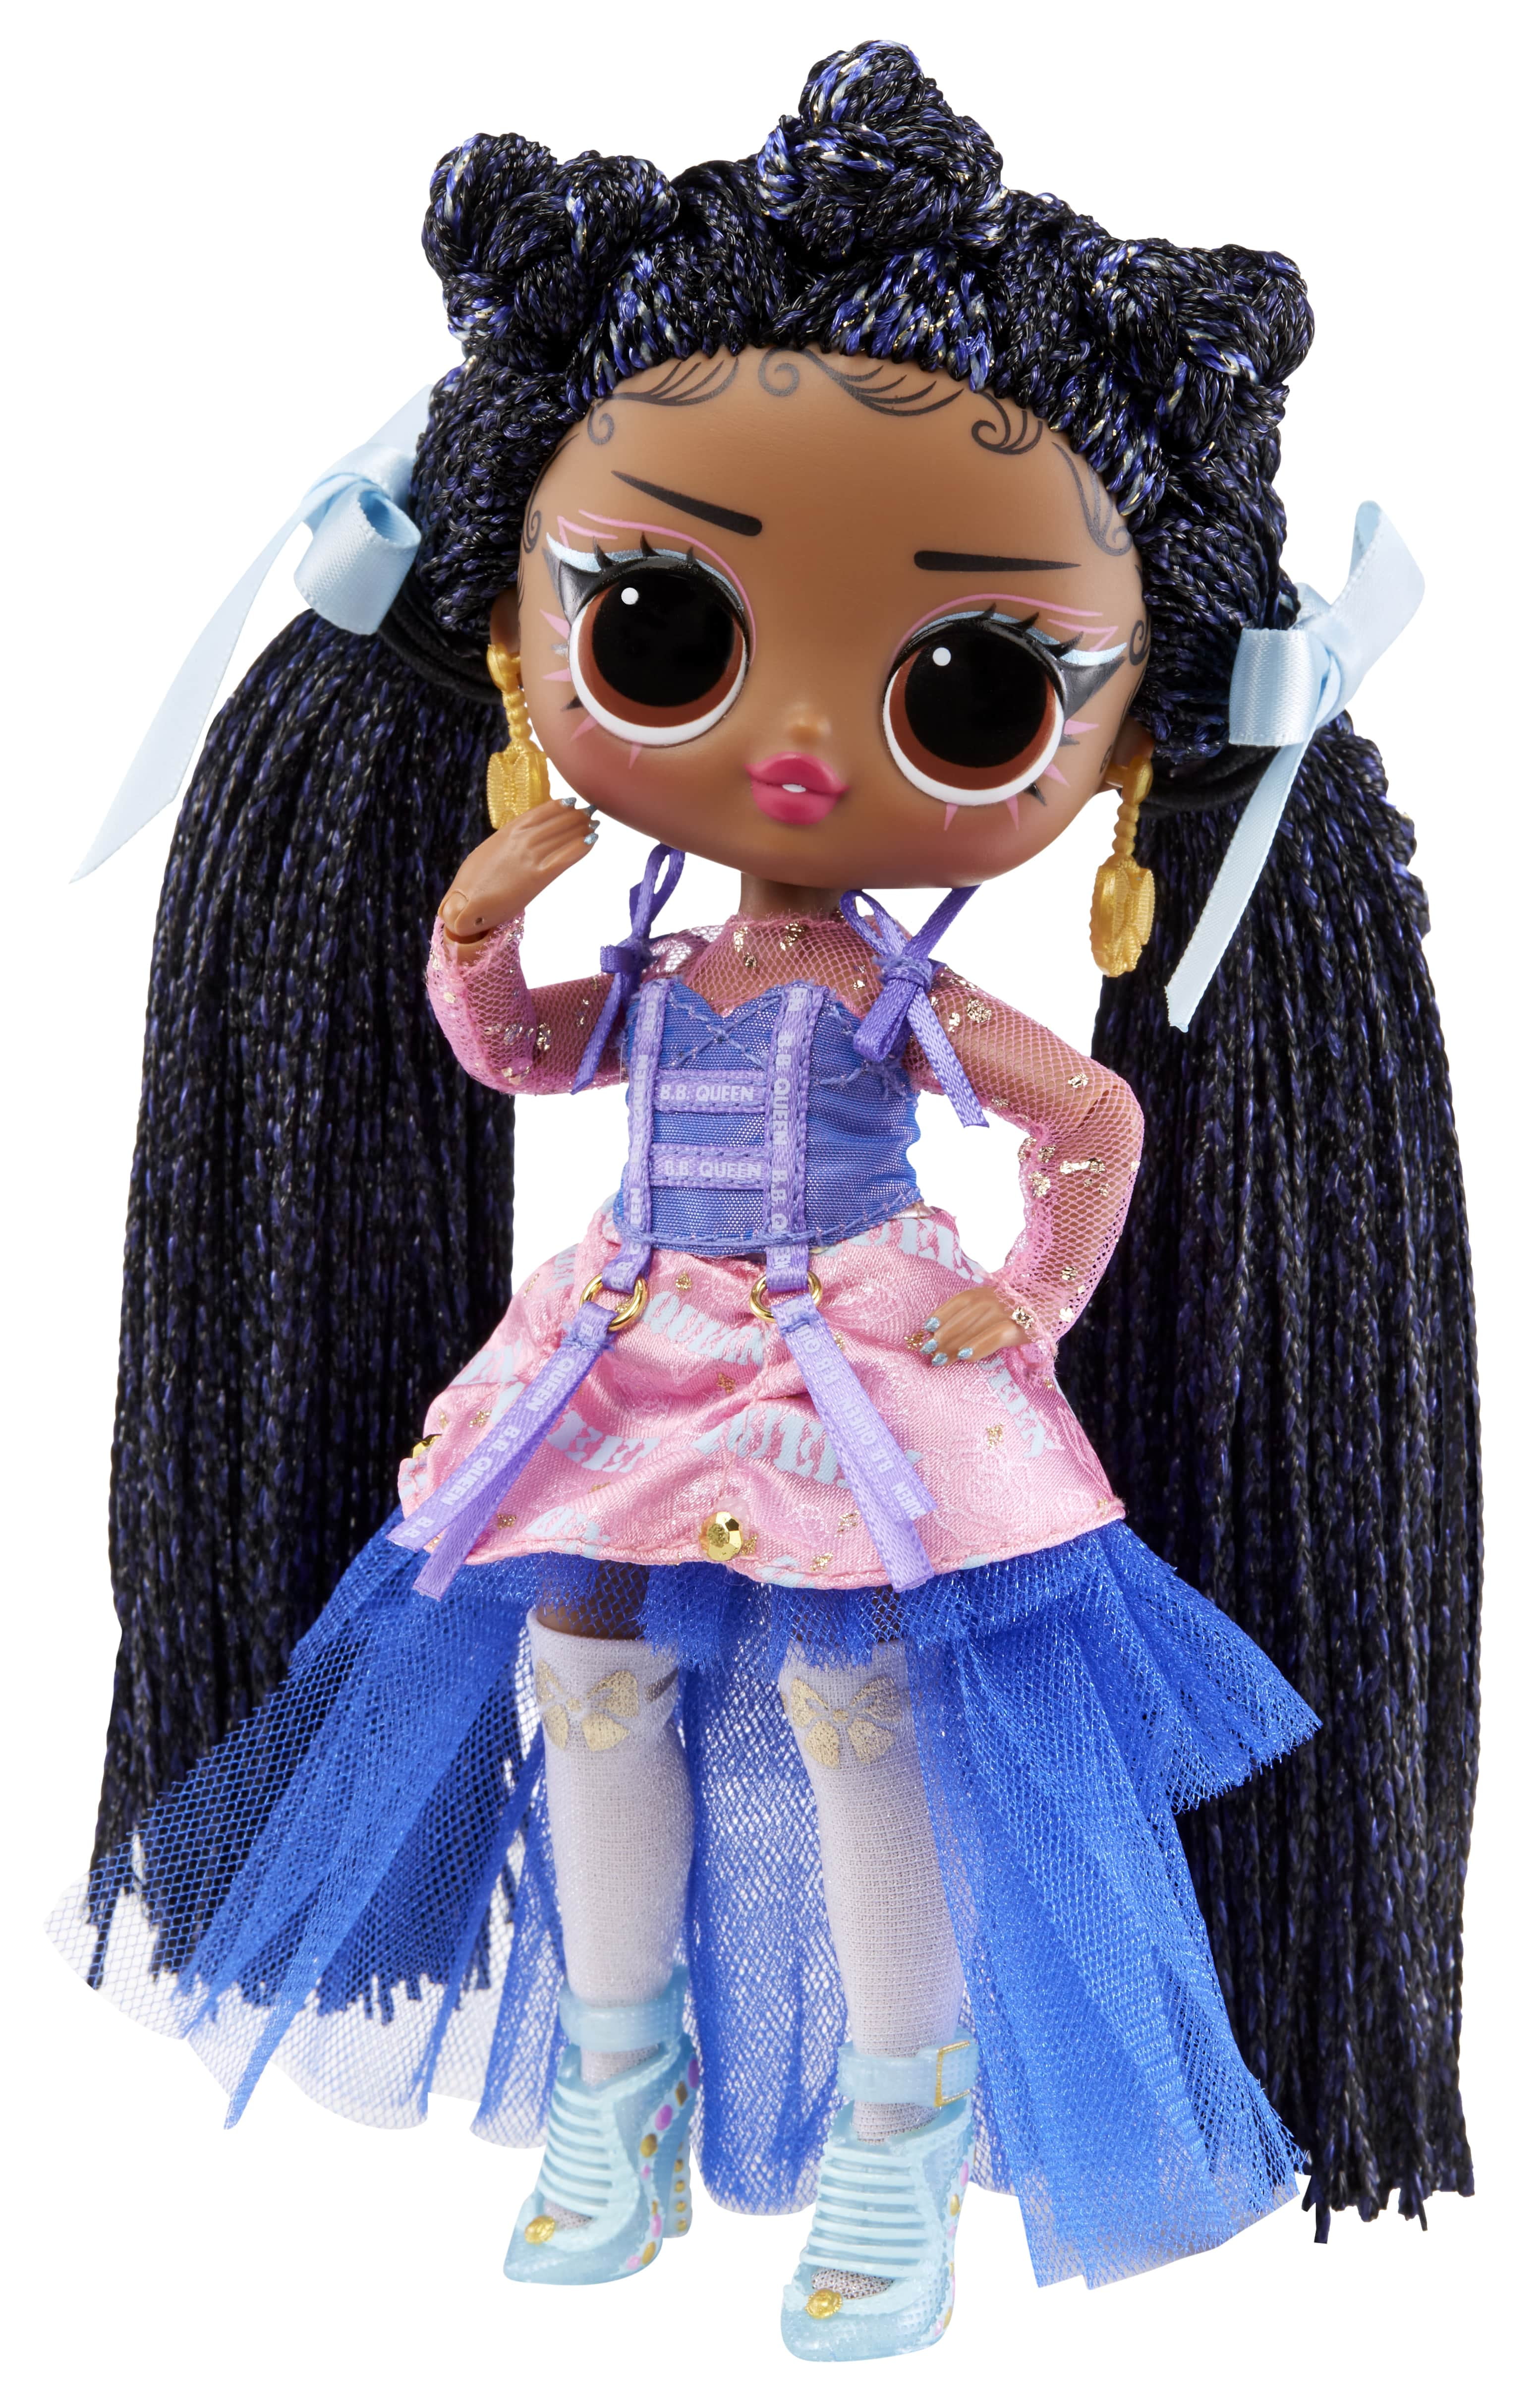 L.O.L Surprise! LOL Surprise Tween Series 3 Fashion Doll Nia Regal with 15 Surprises – Great Gift for Kids Ages 4+